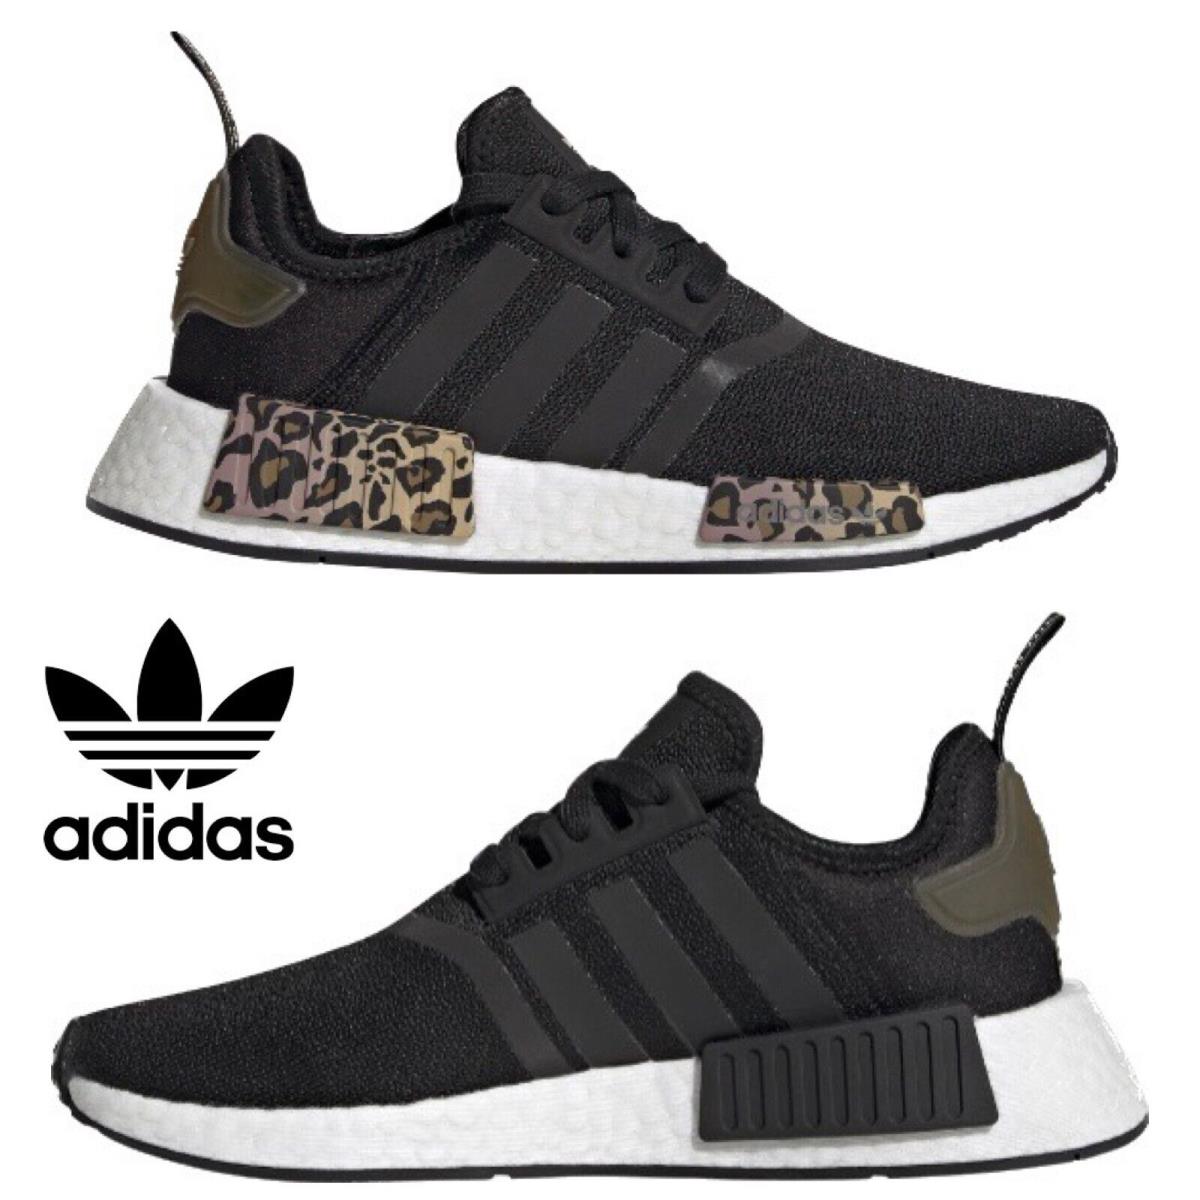 Adidas Originals Nmd R1 Women s Sneakers Casual Shoes Sport Running Black